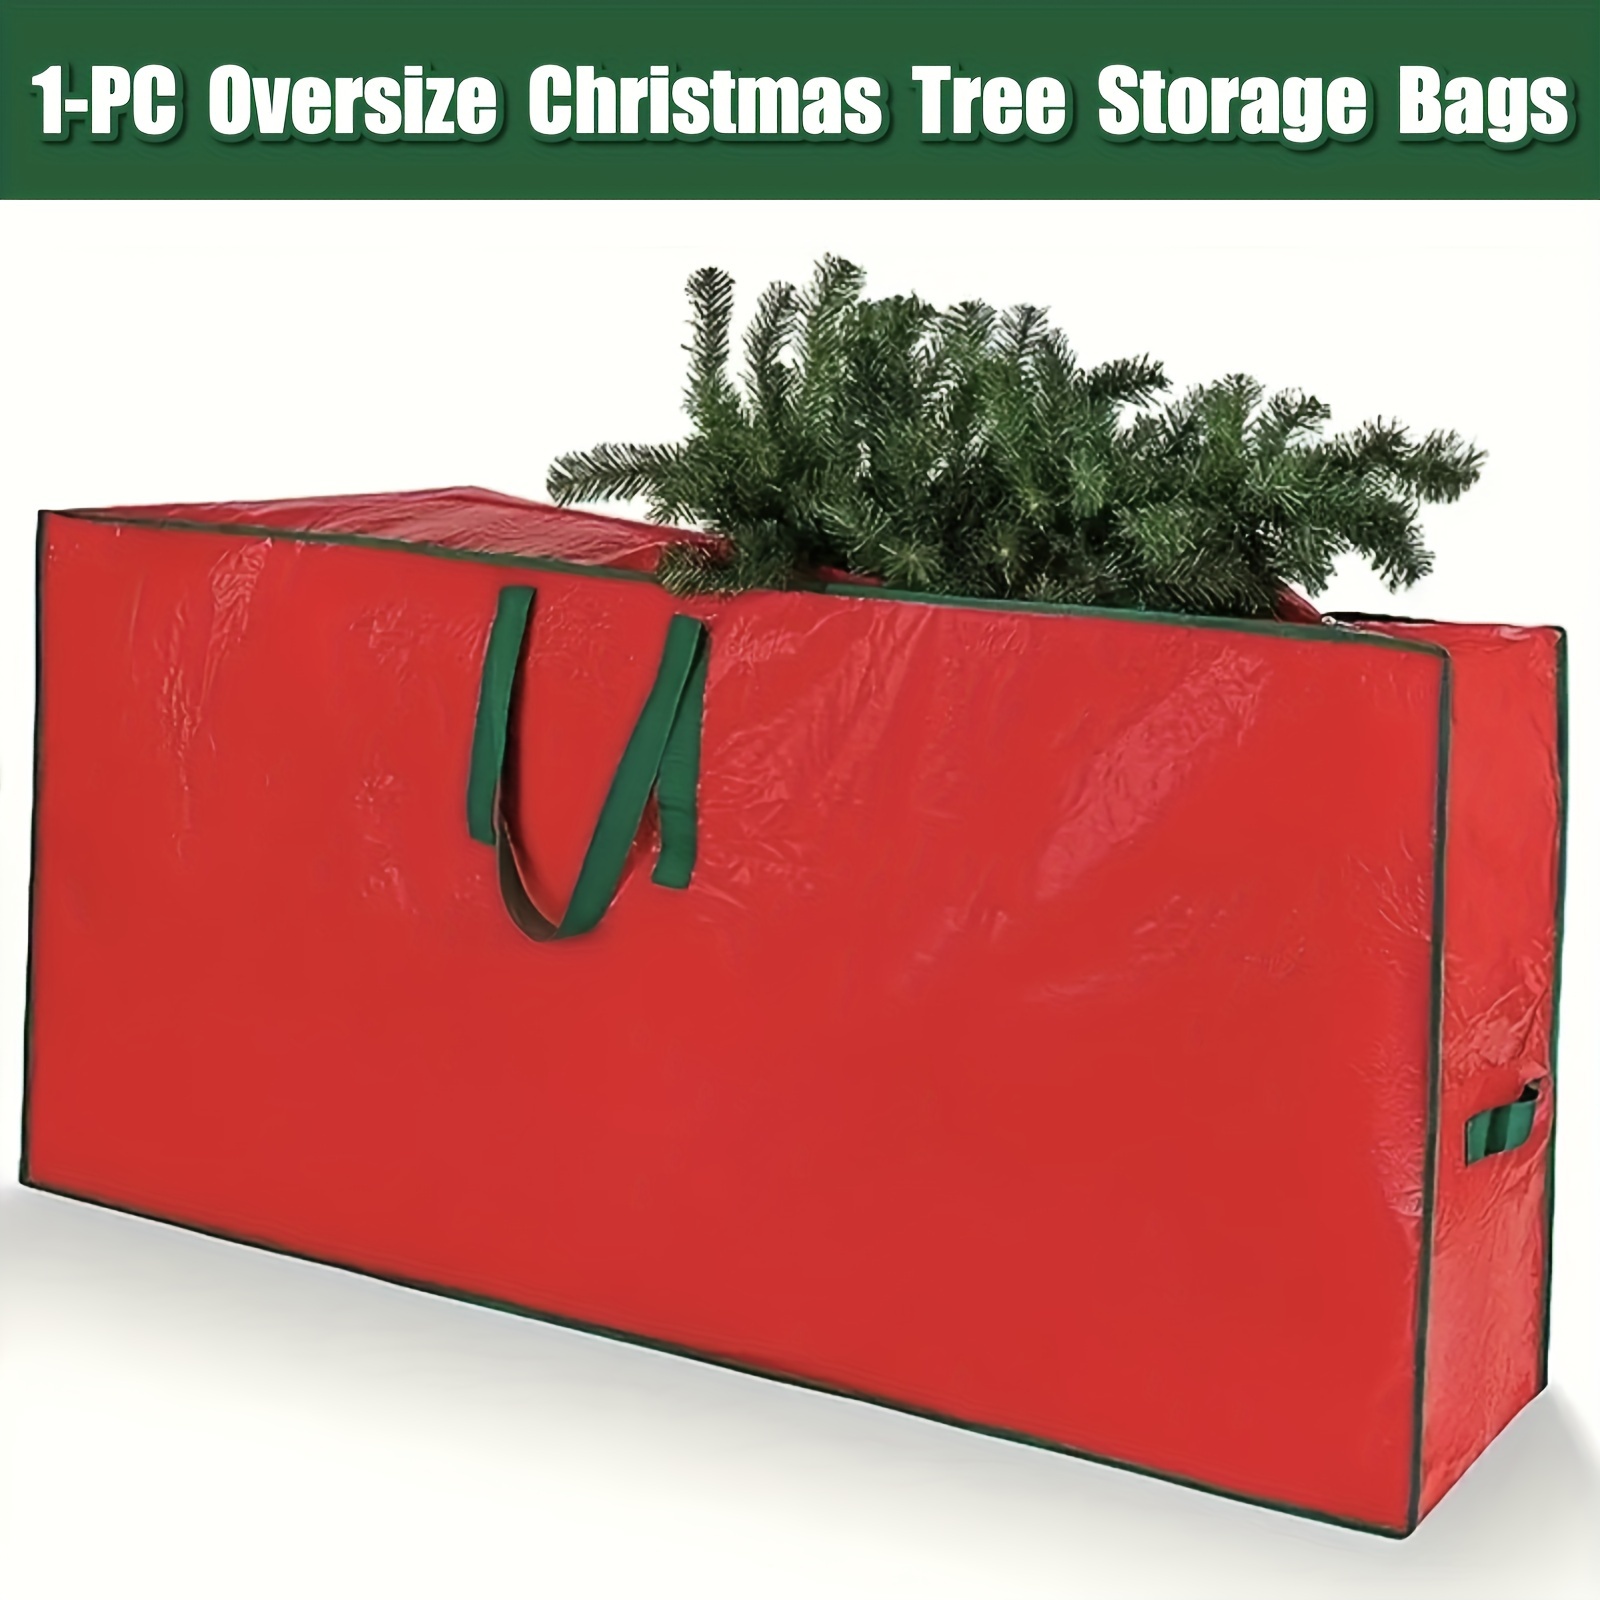 

Extra-large Christmas Tree Storage Bag With Durable Handles & Dual Zipper - Waterproof, Dustproof Polypropylene Organizer For Holiday Decor